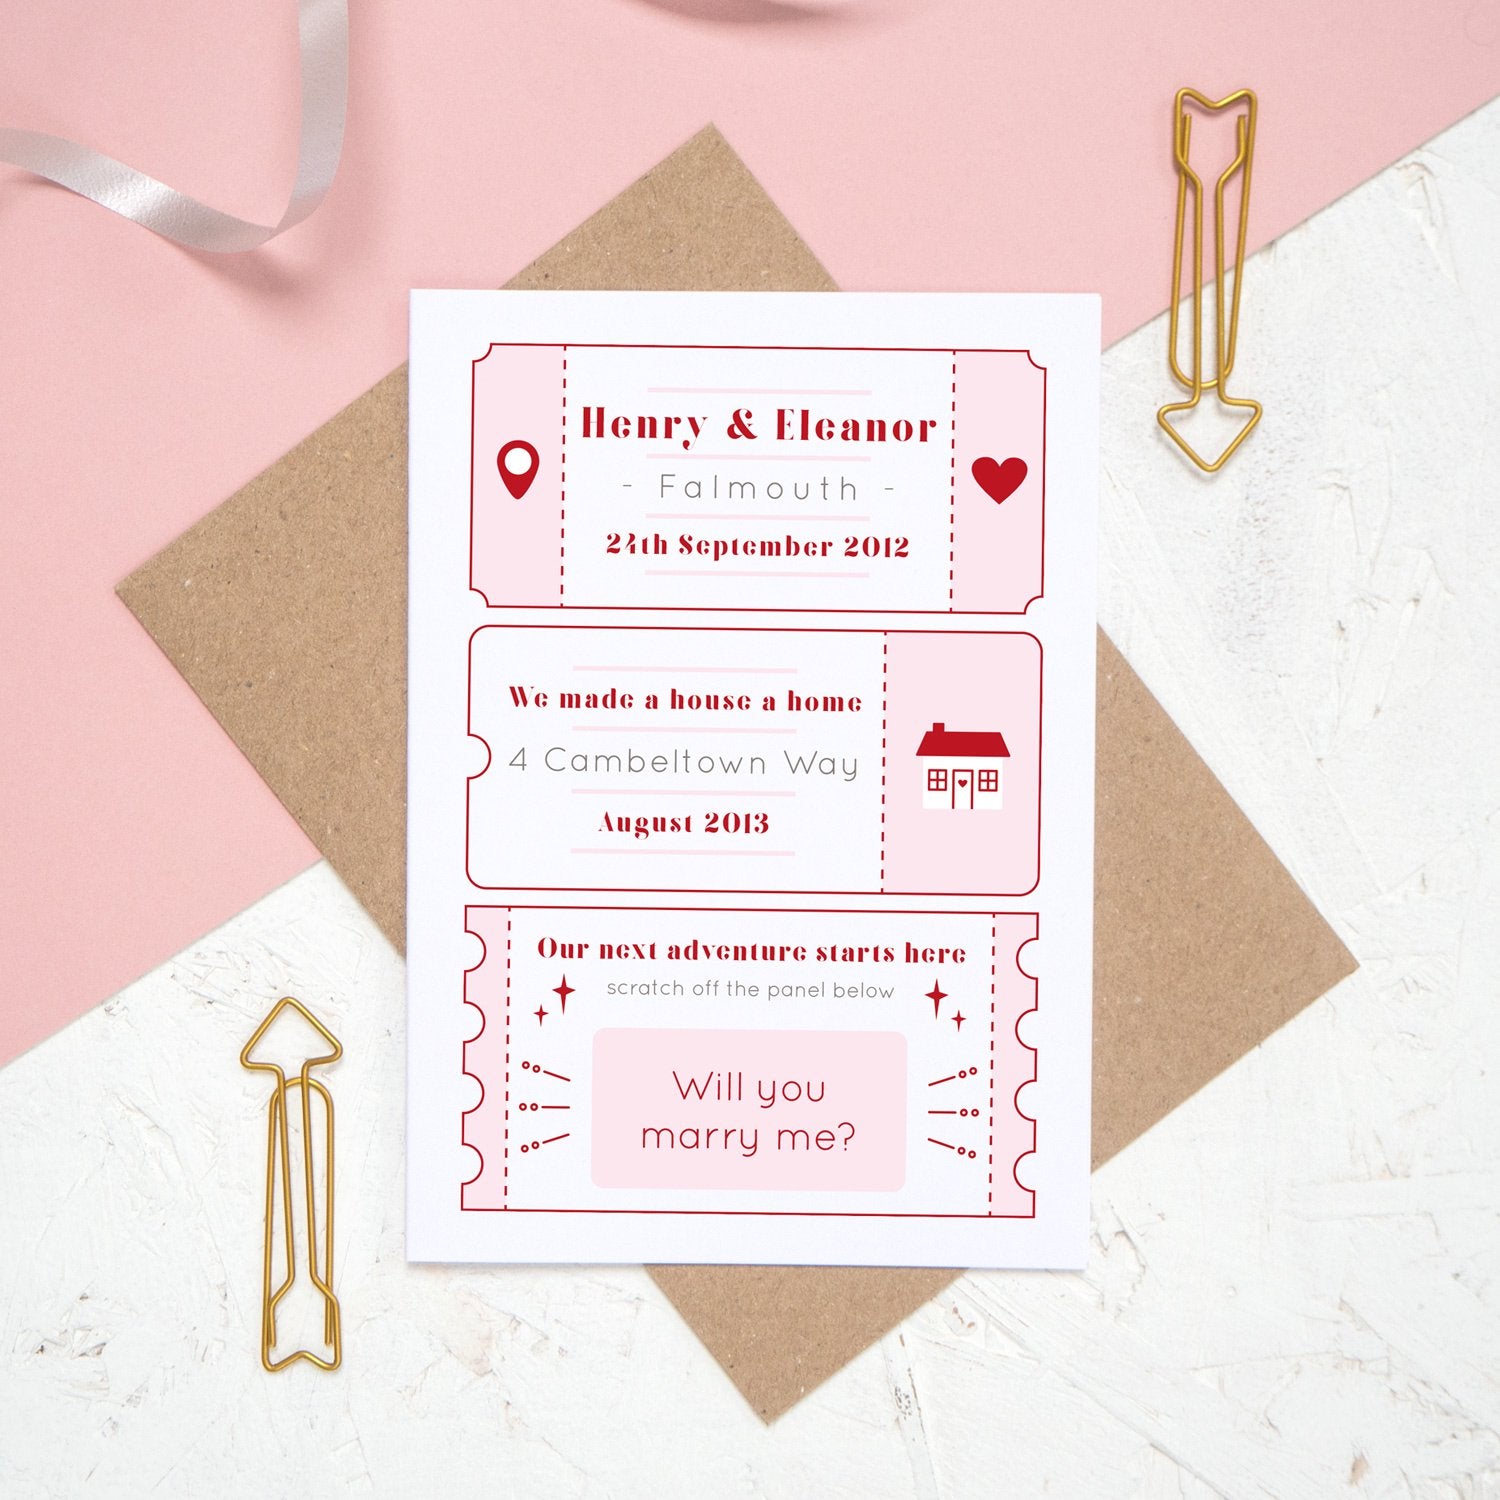 A personalised will you marry me scratch card where the question has been fully revealed. The card details special moments such as when you first met and where you first lived together.